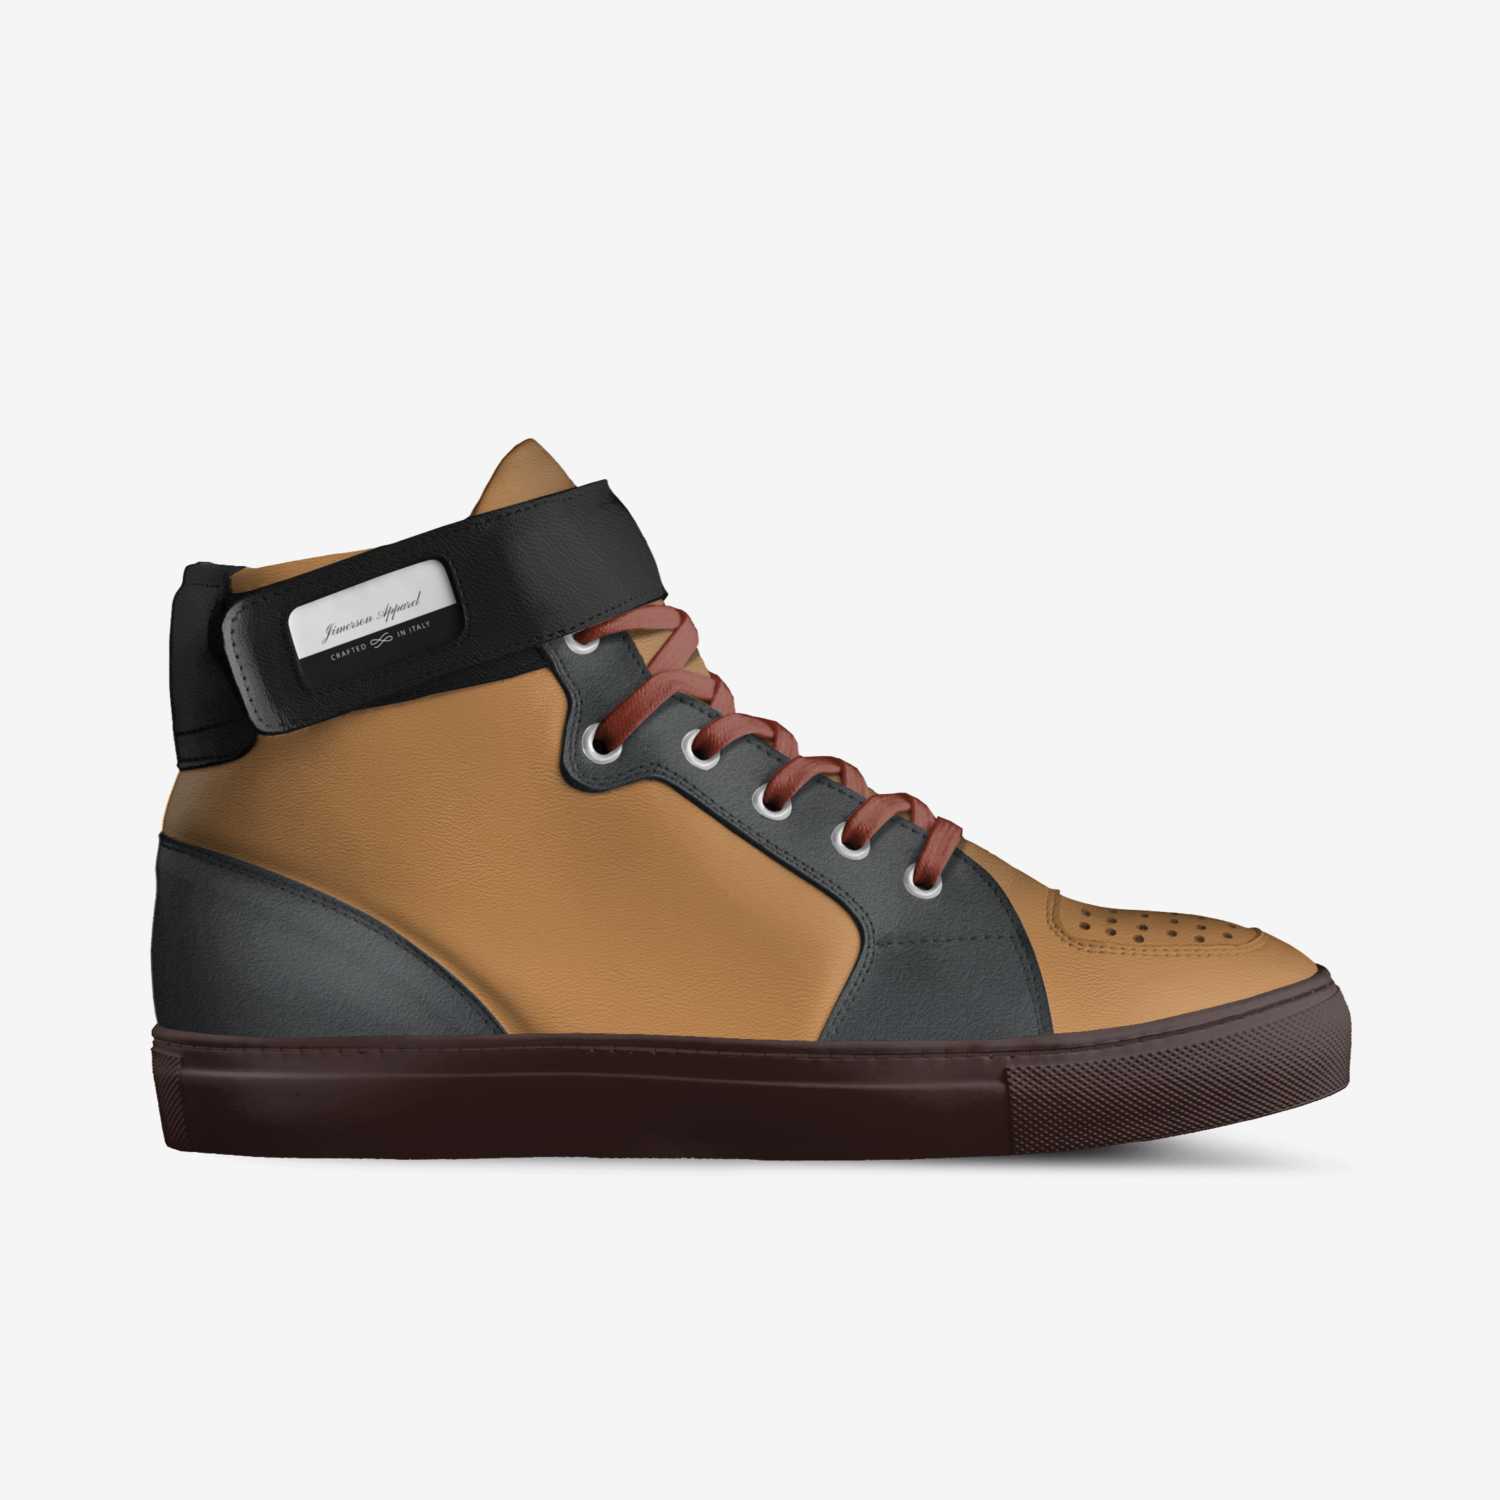 Jimerson Apparel custom made in Italy shoes by Dwane Jimerson | Side view